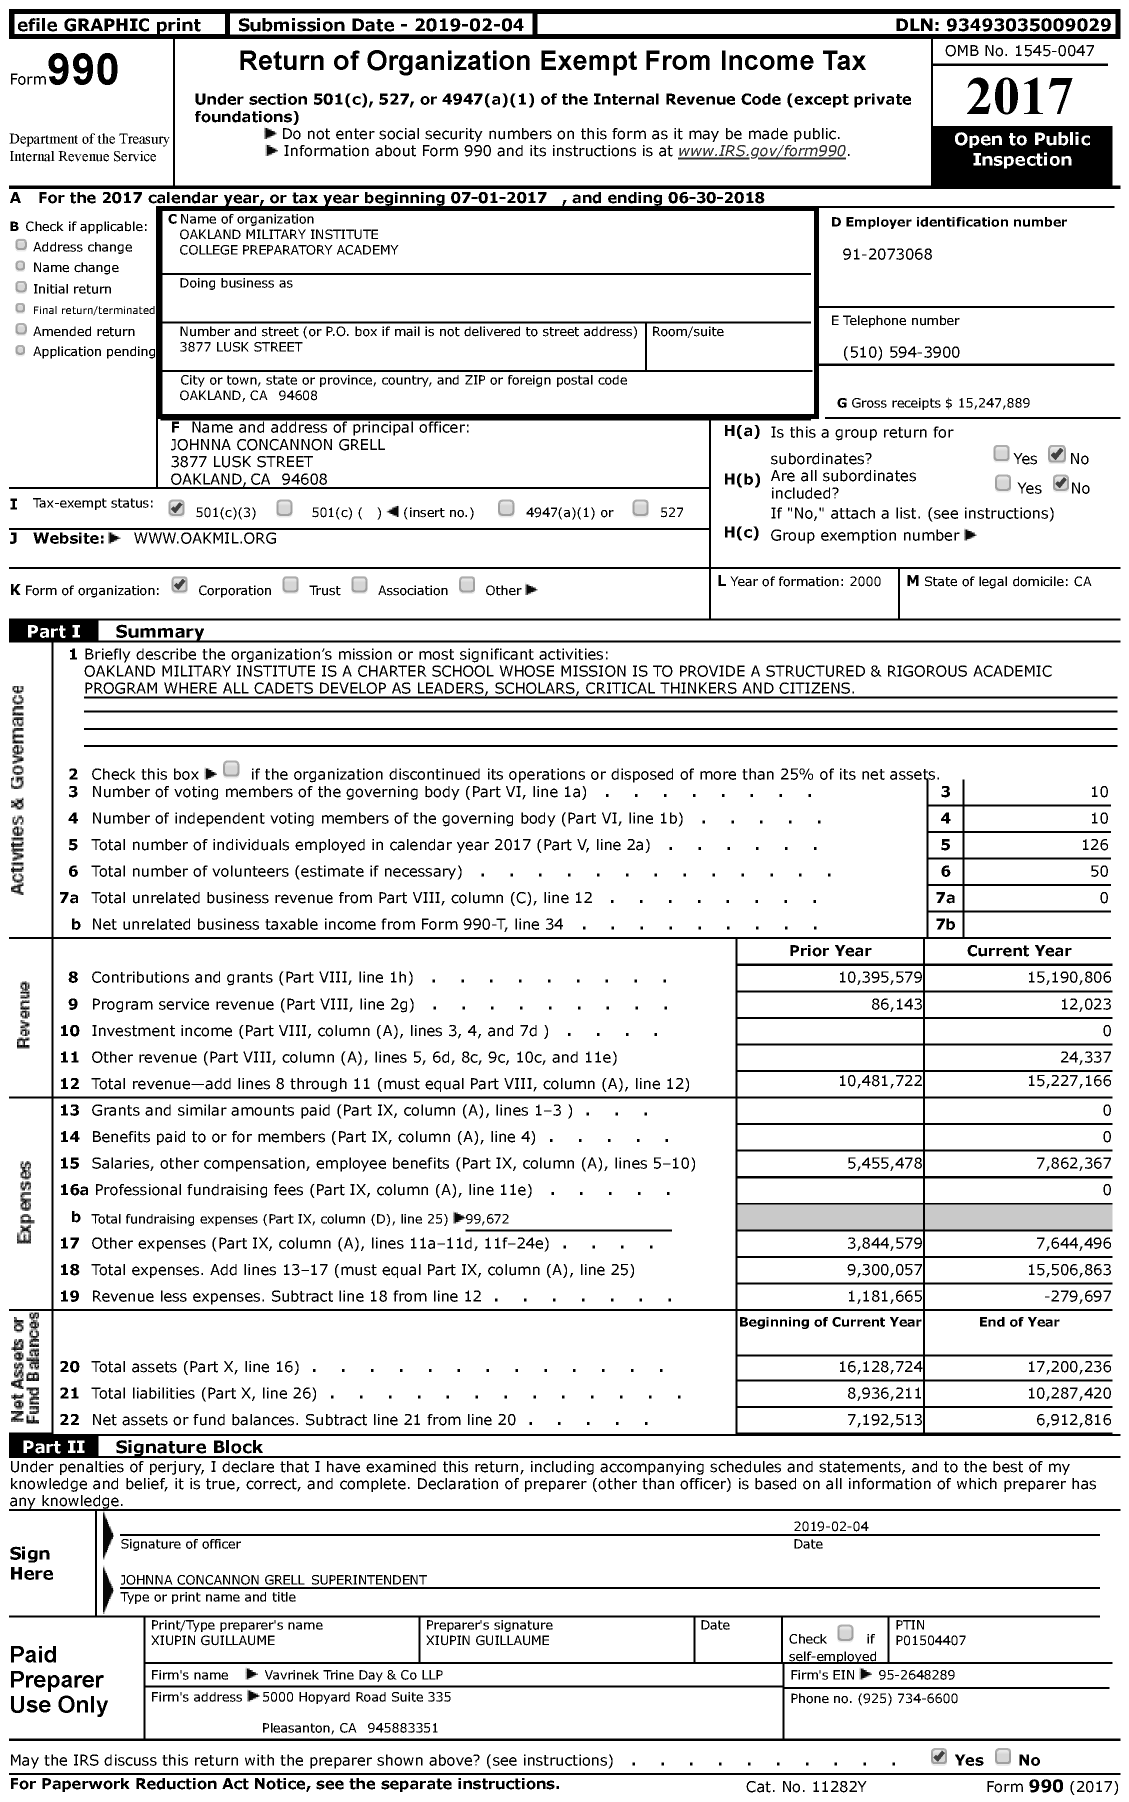 Image of first page of 2017 Form 990 for Oakland Military Institute College Preparatory Academy (OMI)